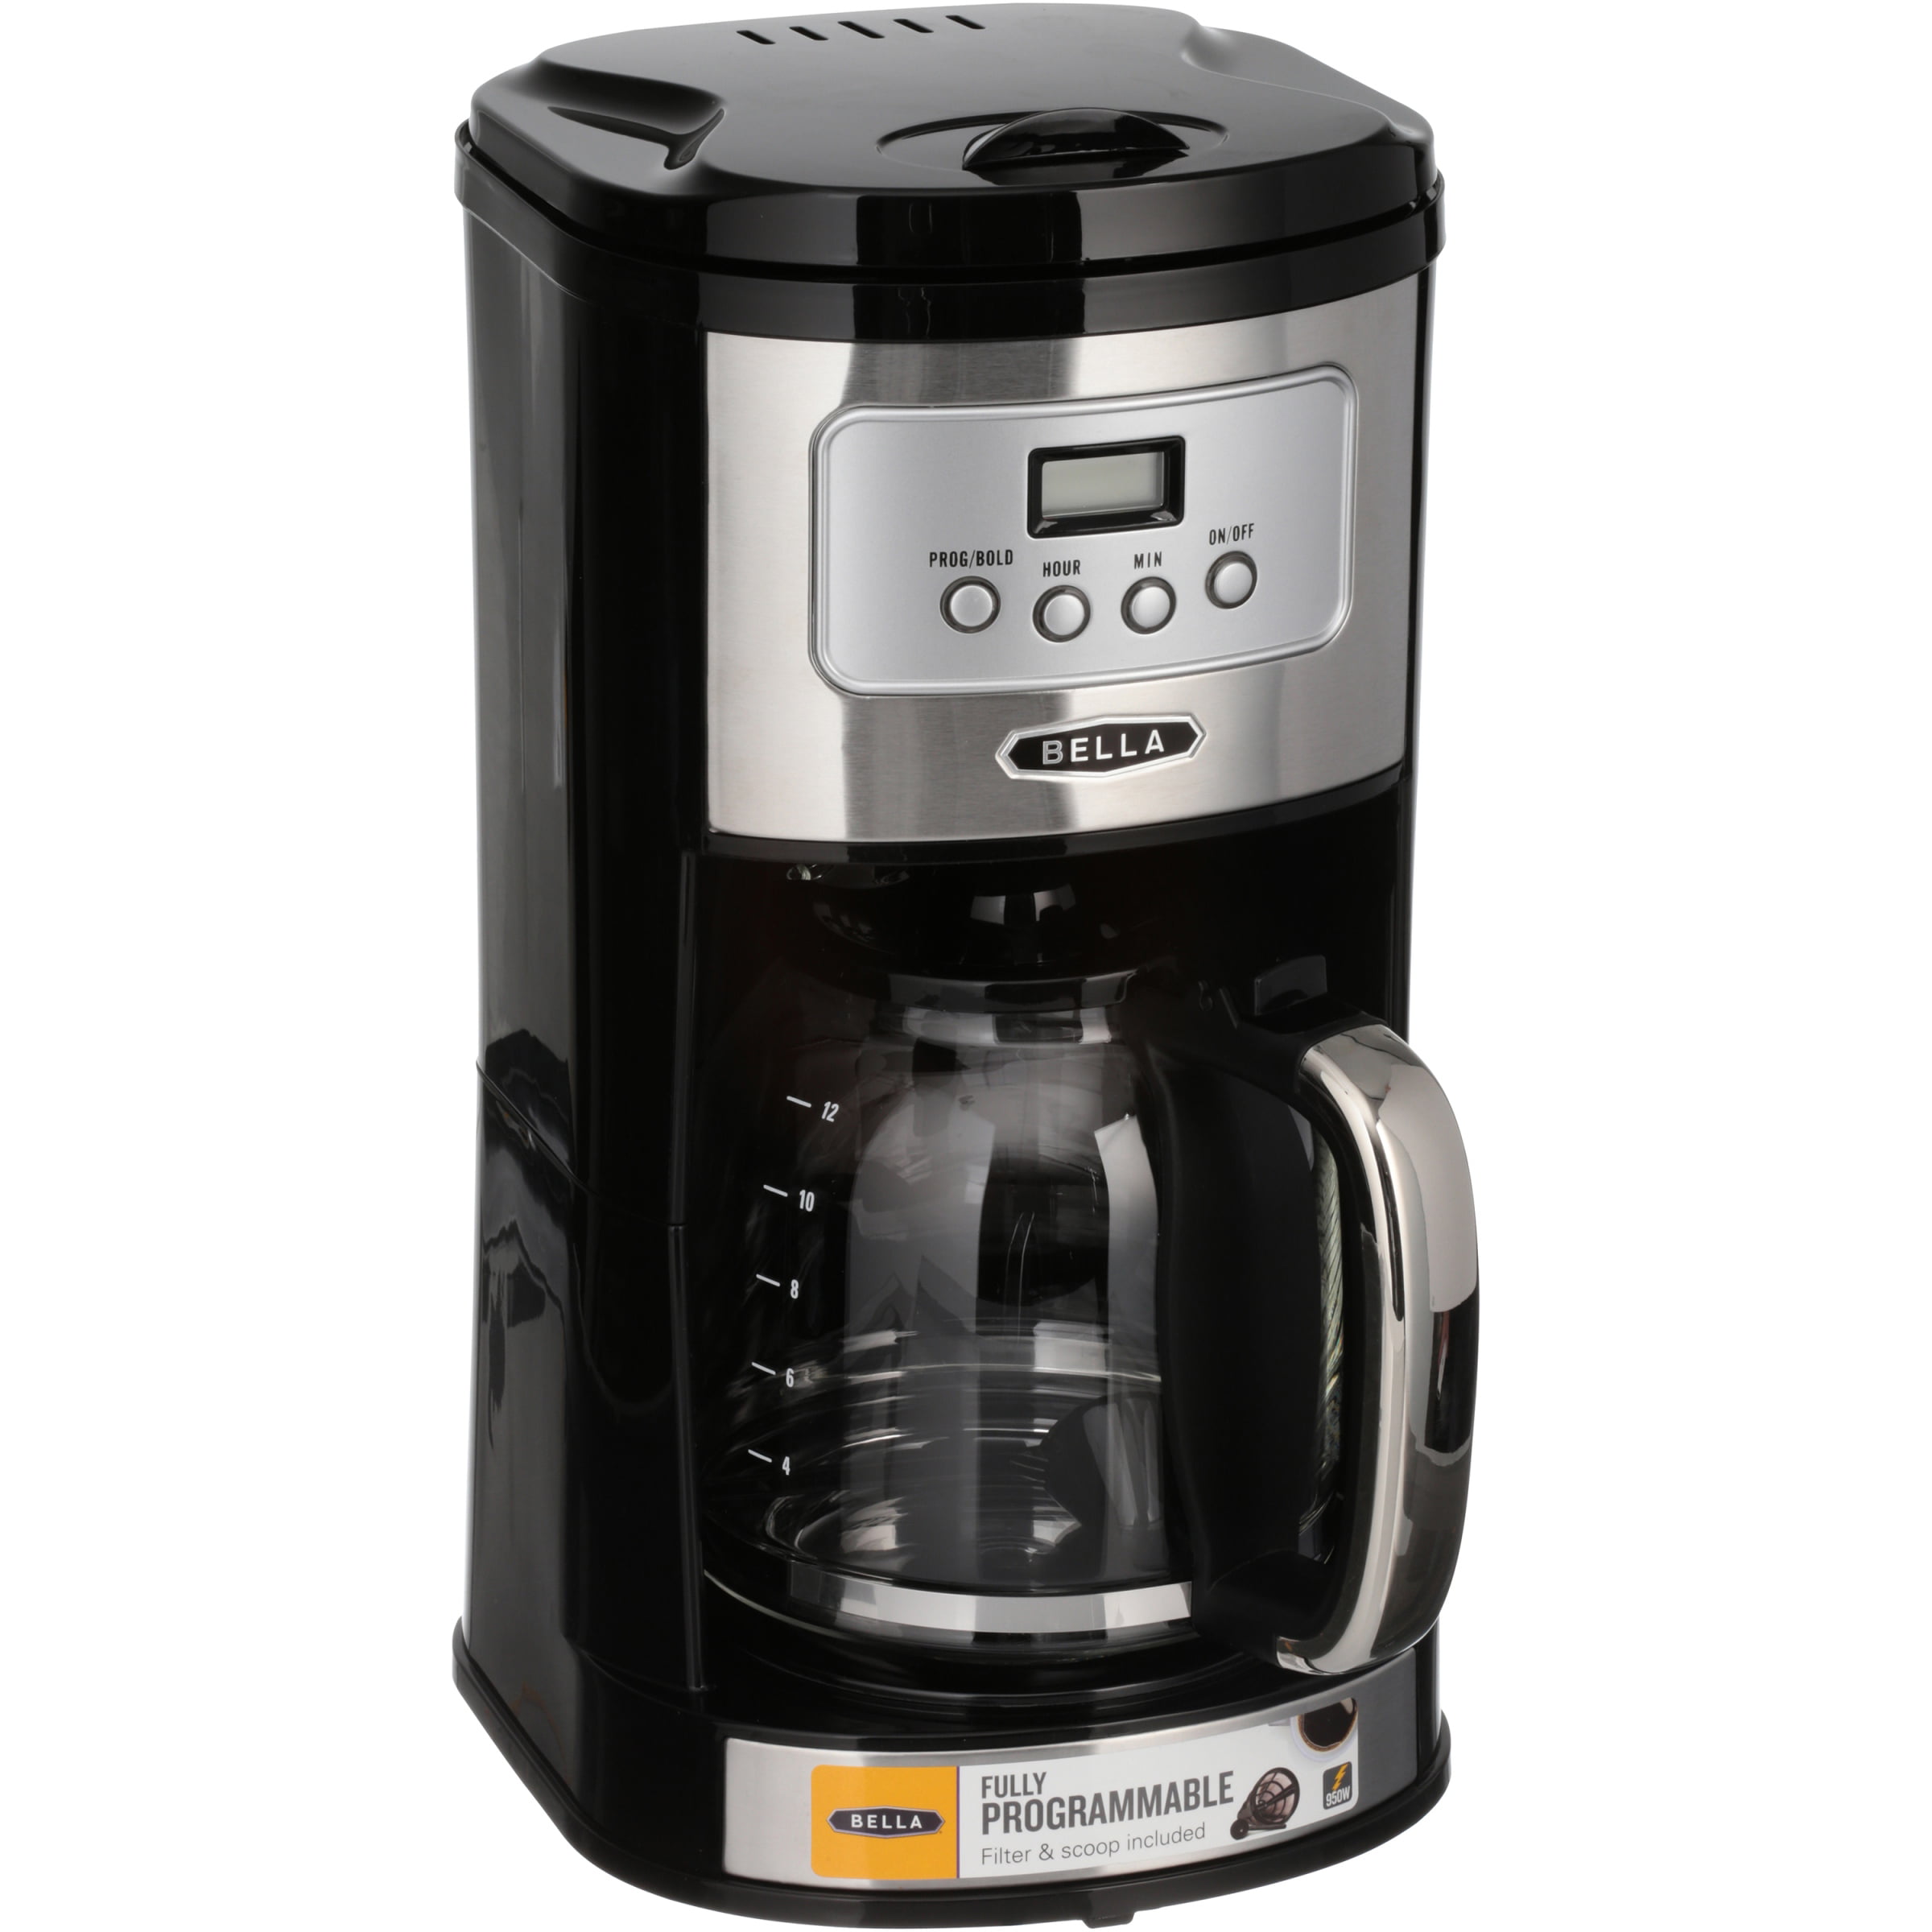 Bella 12 Cup Programable Coffee Maker Review 